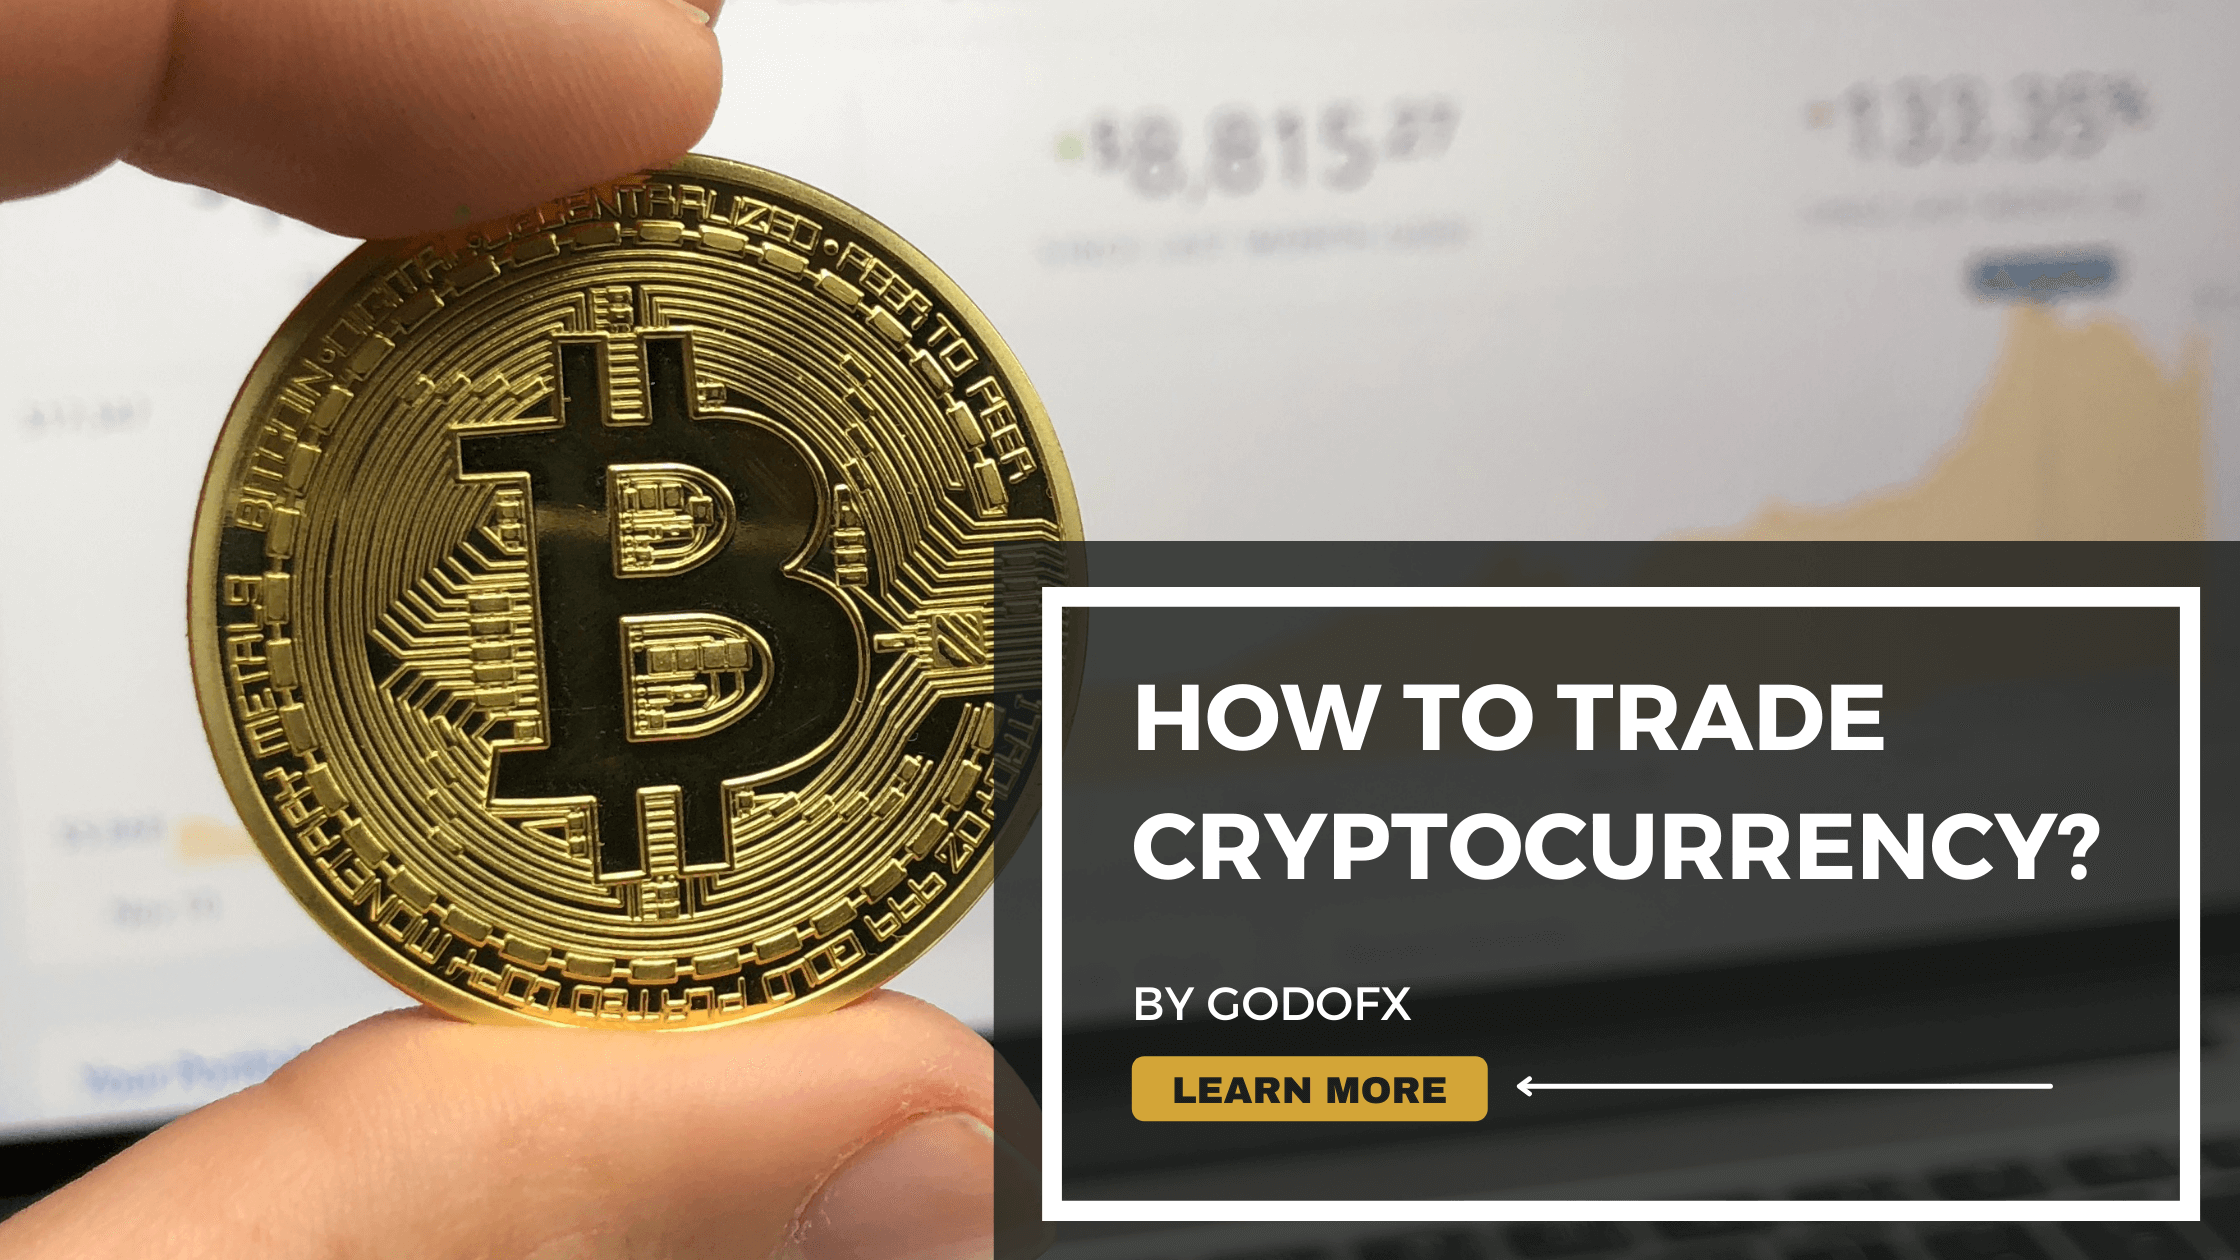 How to Trade Cryptocurrency?